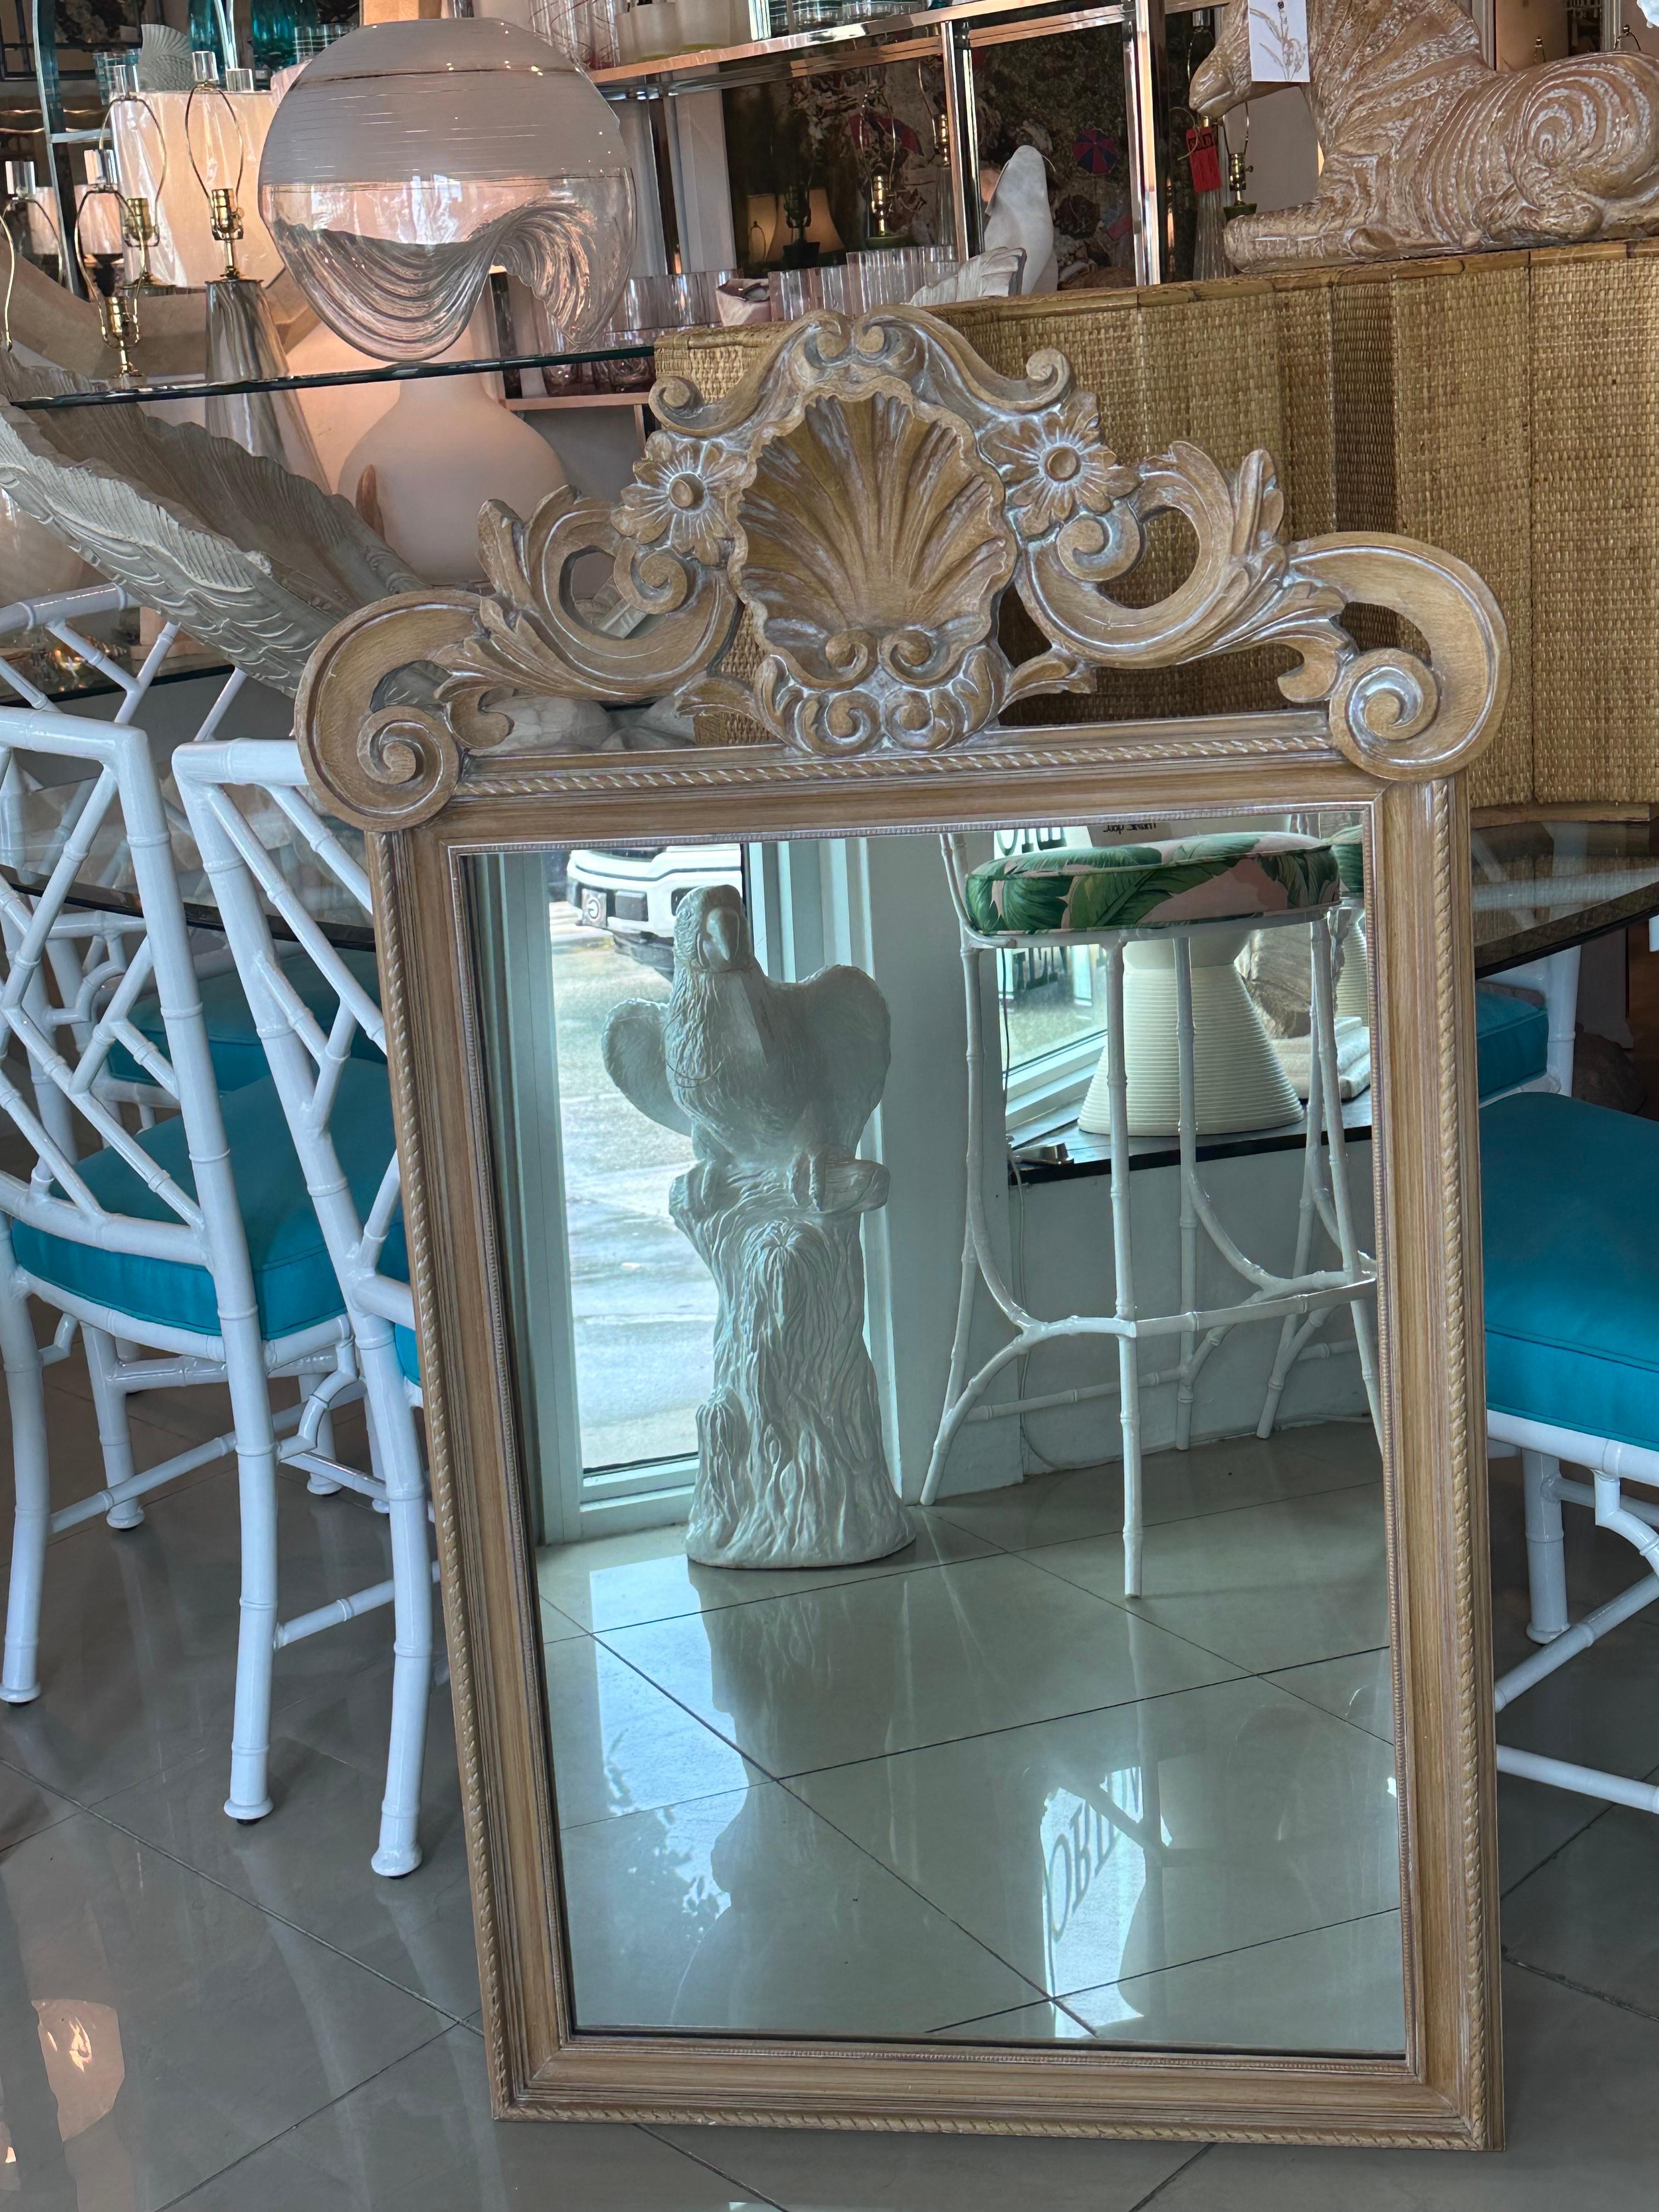 Lovely vintage Italian wood carved shell seashell, scalloped clamshell, wall mirror. All new hardware has been installed for hanging. New mirror insert. Dimensions: 45.5 H x 28.25 W x 2 D.